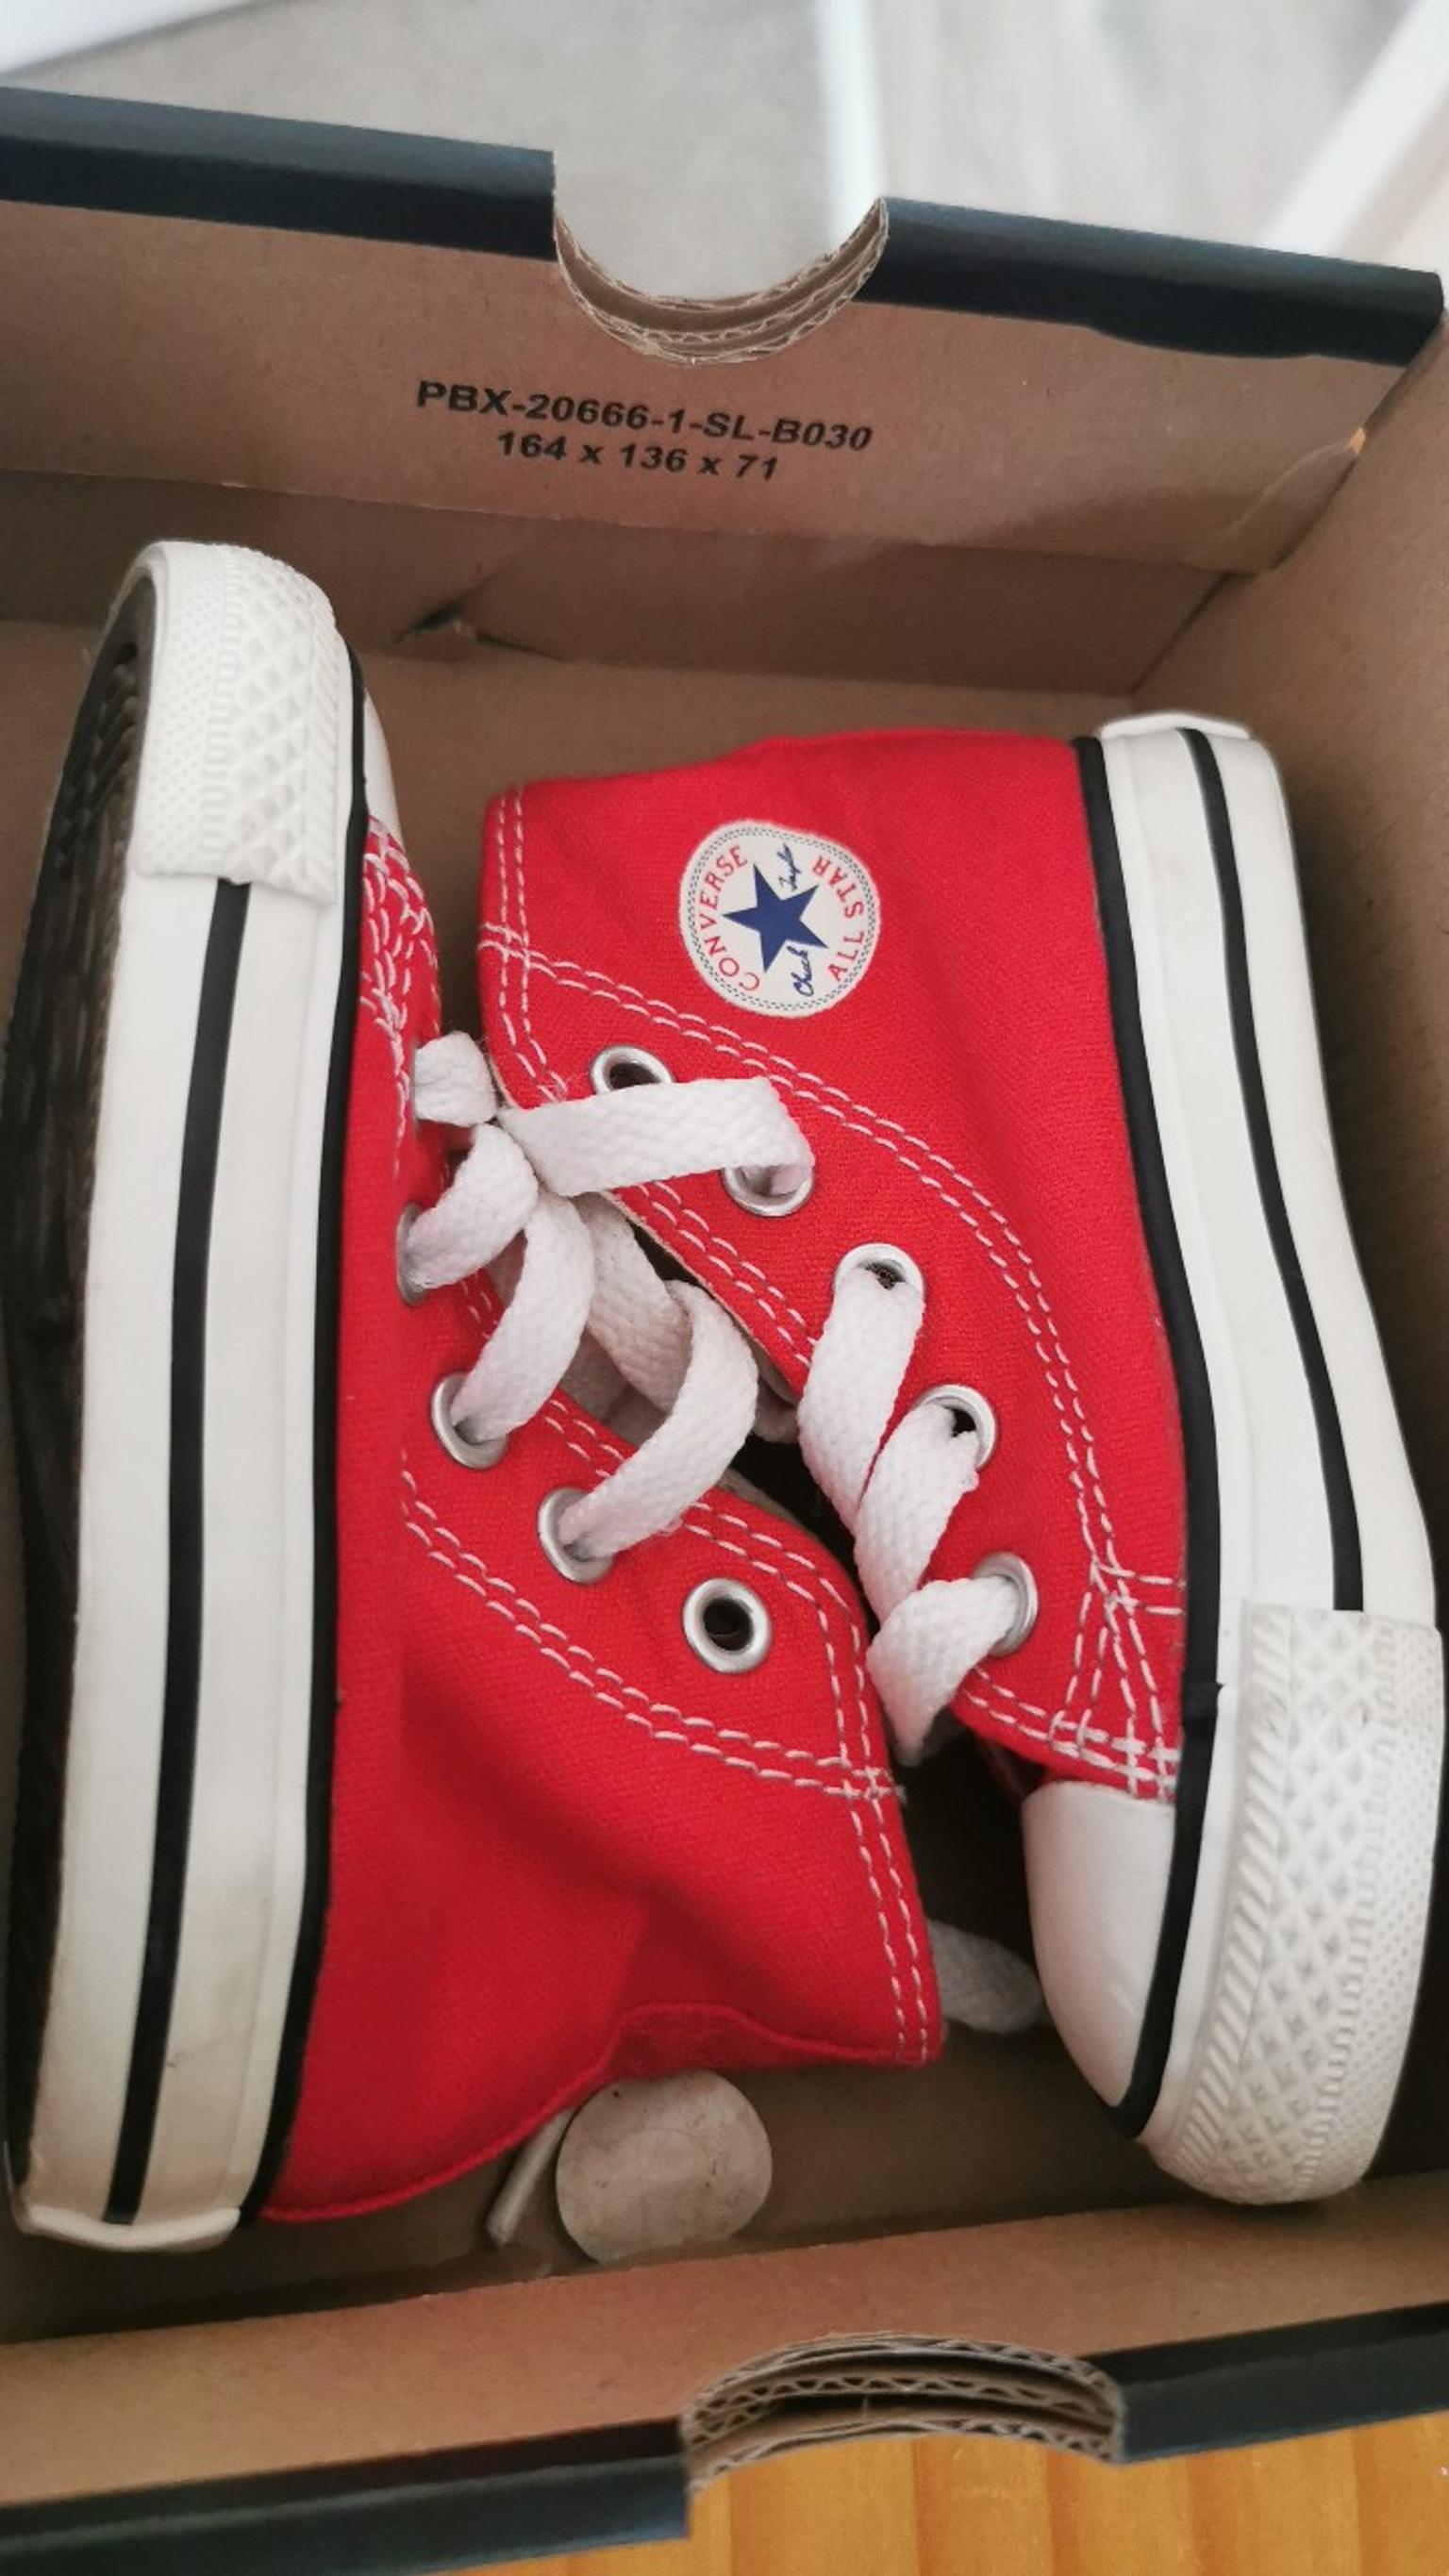 red converse size 4